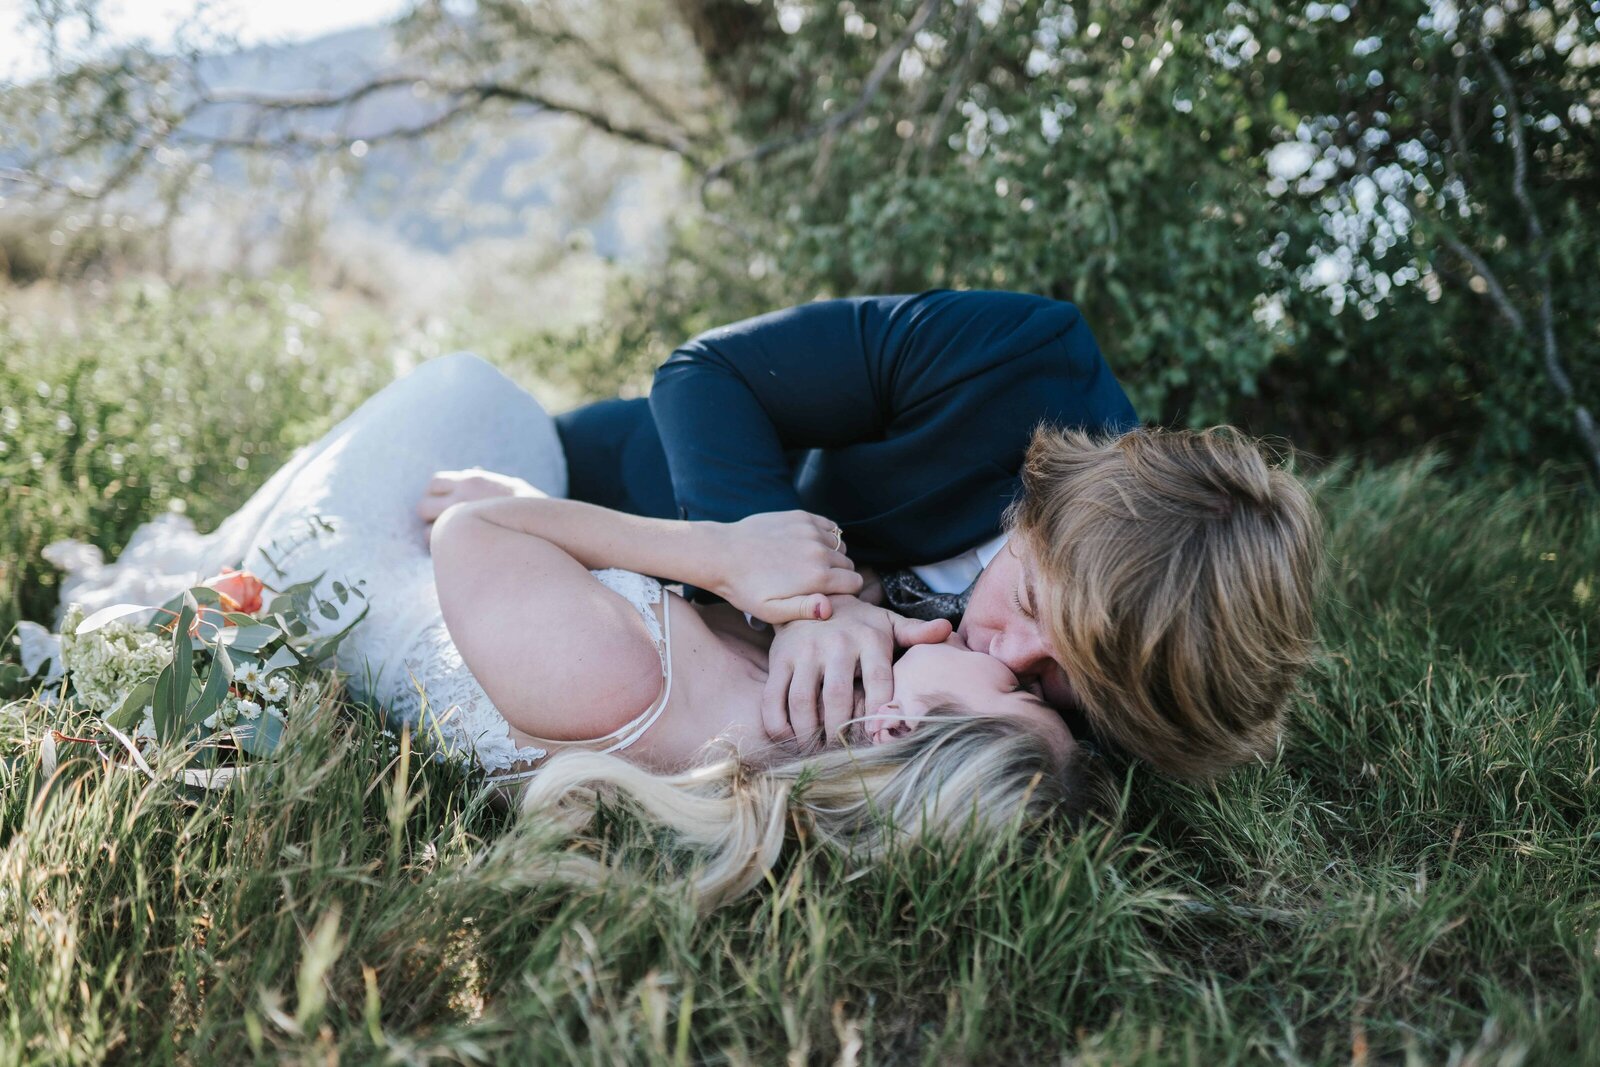 Lake Tahoe wedding photographer captures bride and groom rolling around in grass after Lake Tahoe wedding